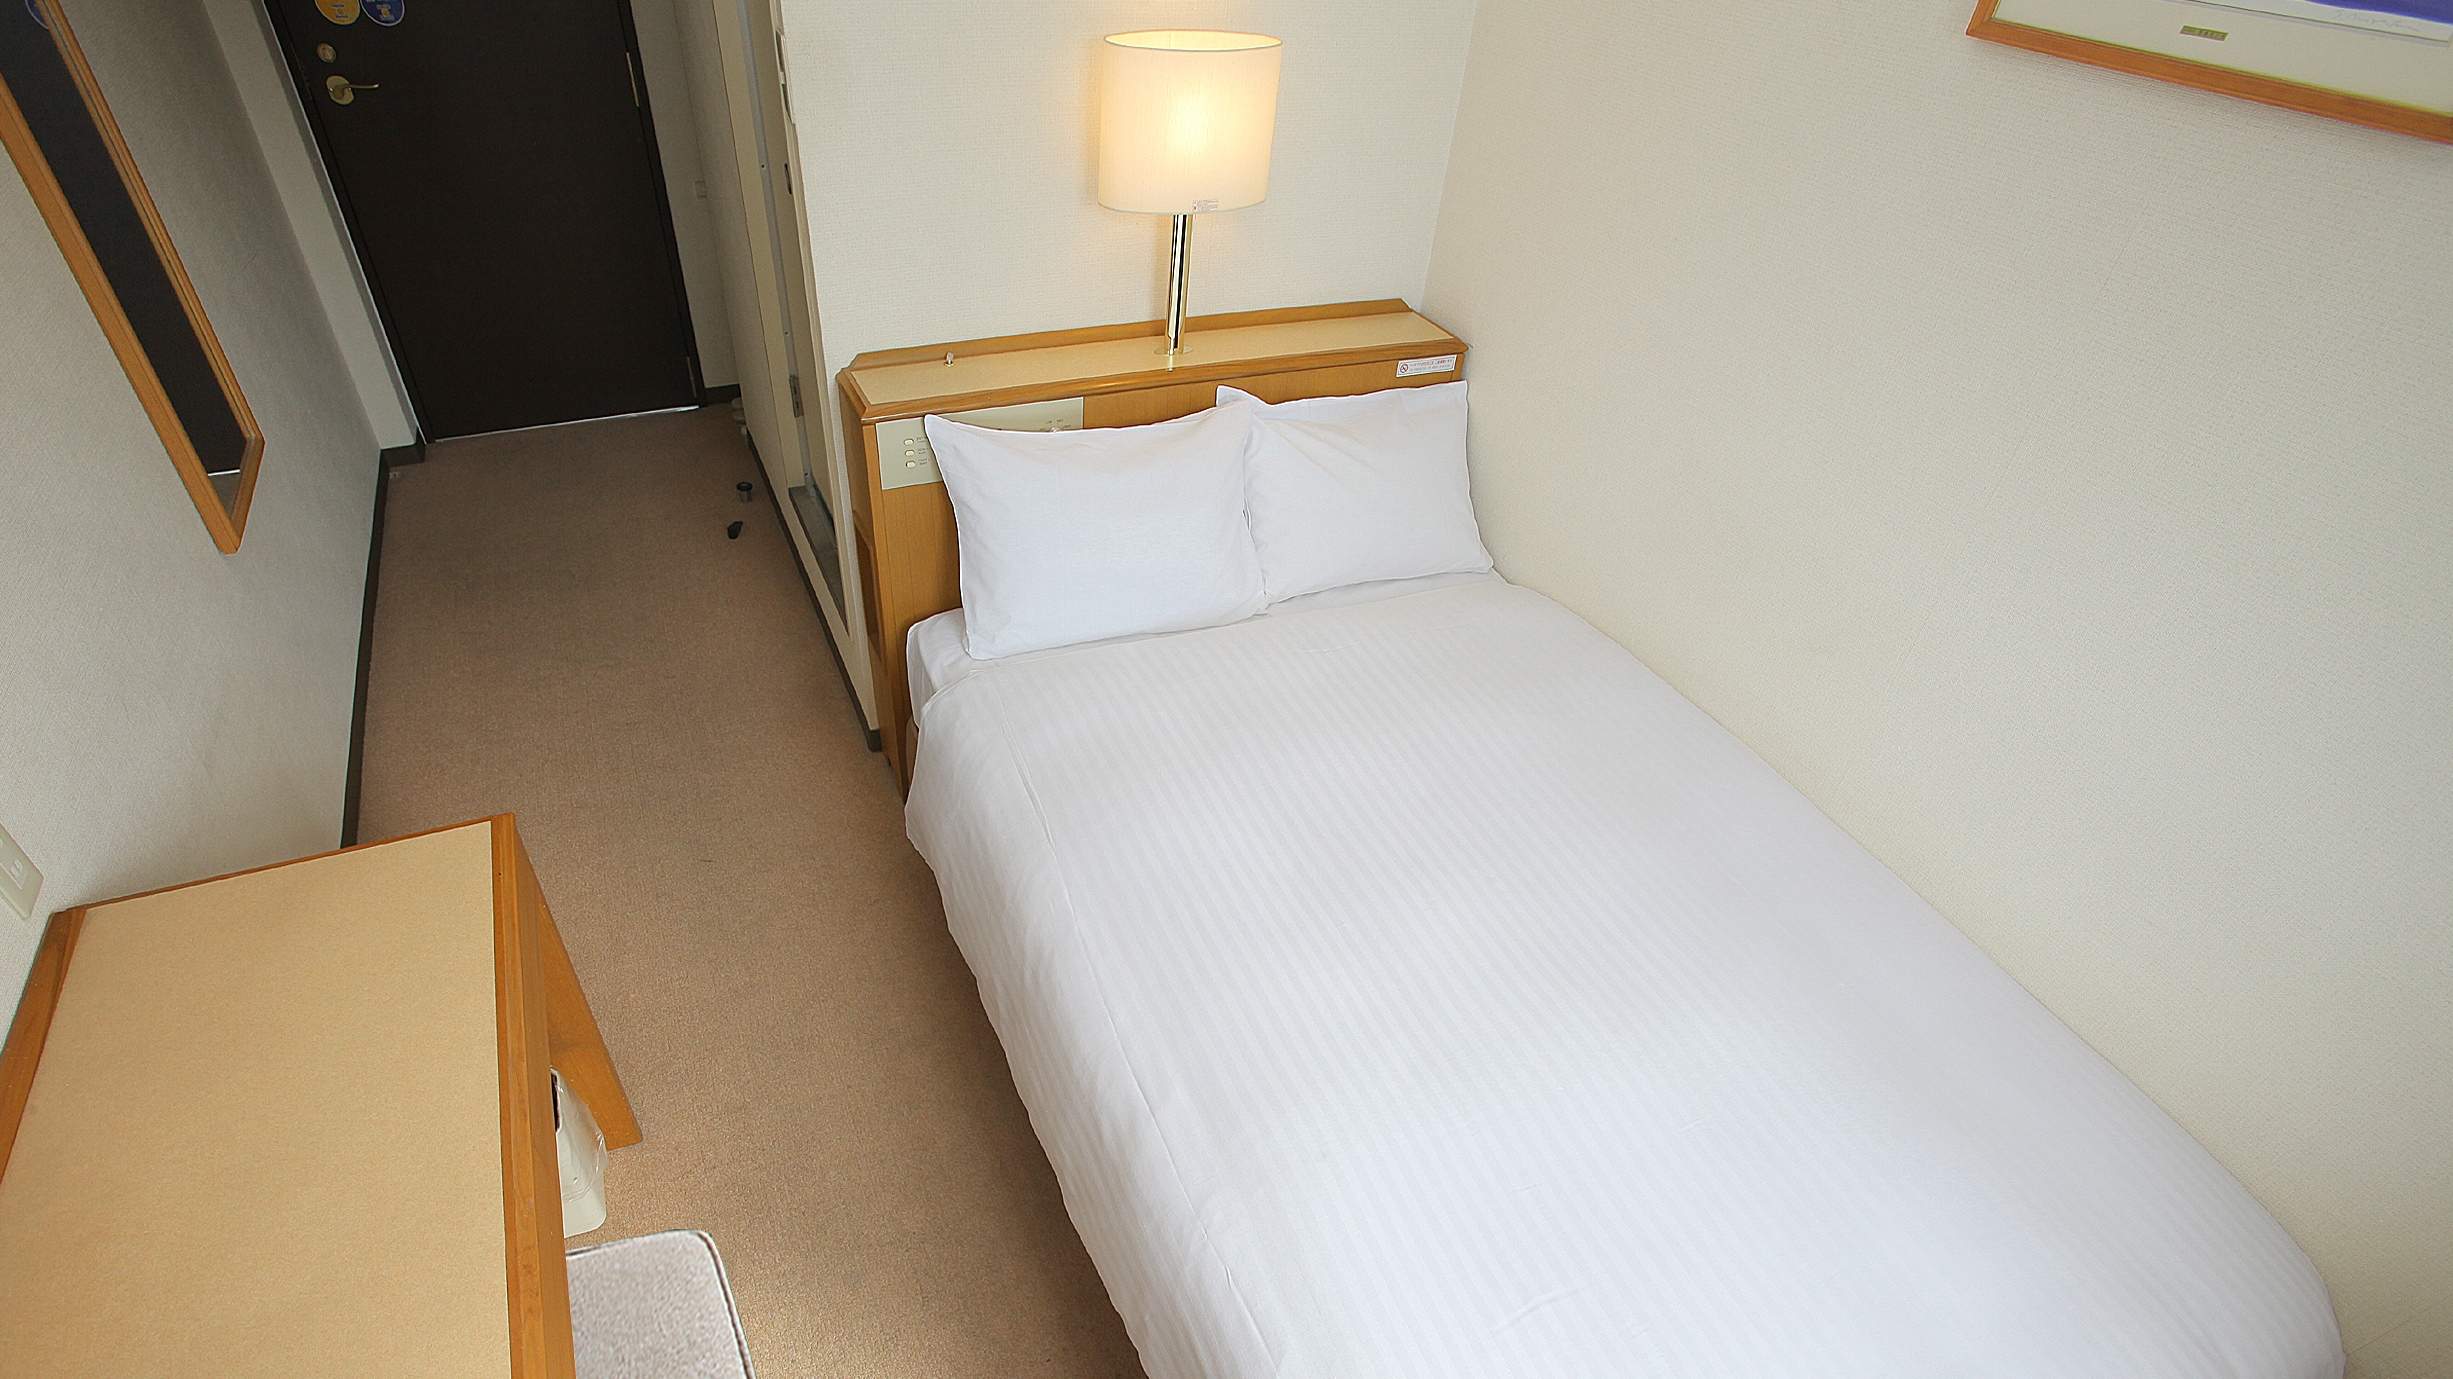 Semi-double room (single room for 2 people) ◇ Area 12㎡ ◇ 120cm wide semi-double bed ◇